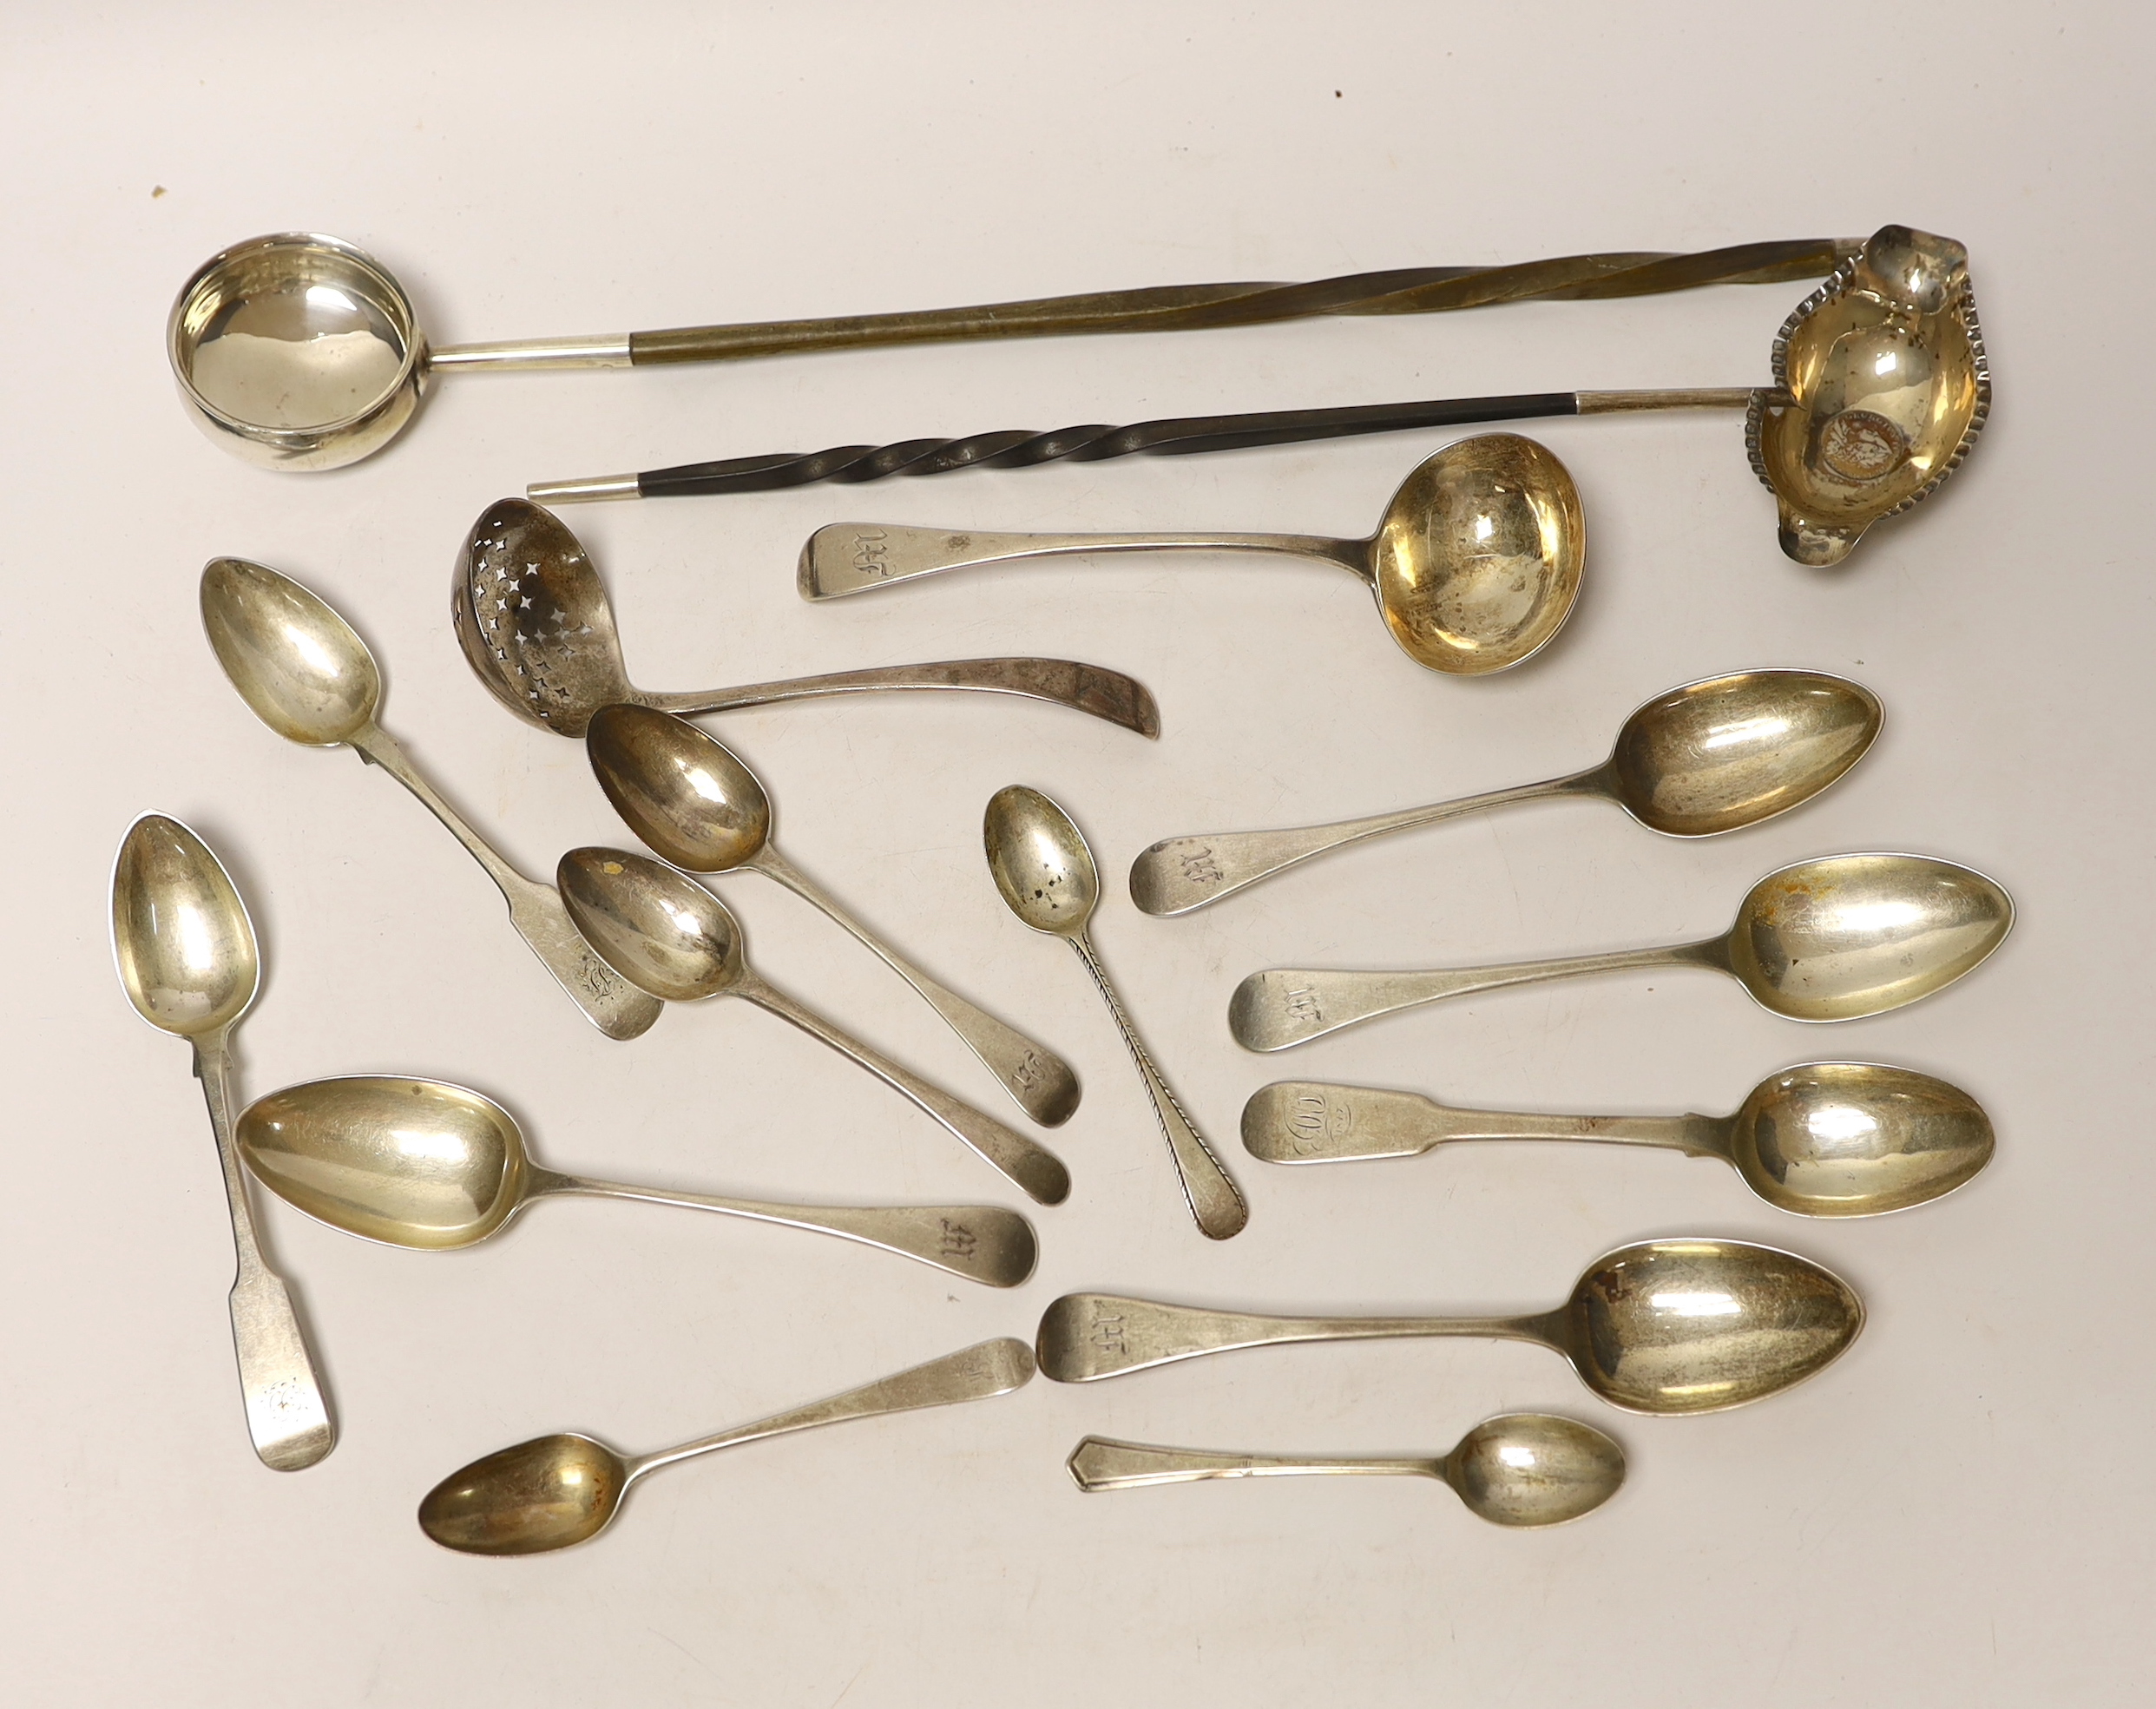 Two 19th century toddy ladles, including Scottish silver and a small quantity of assorted 19th century silver flatware, 15oz.